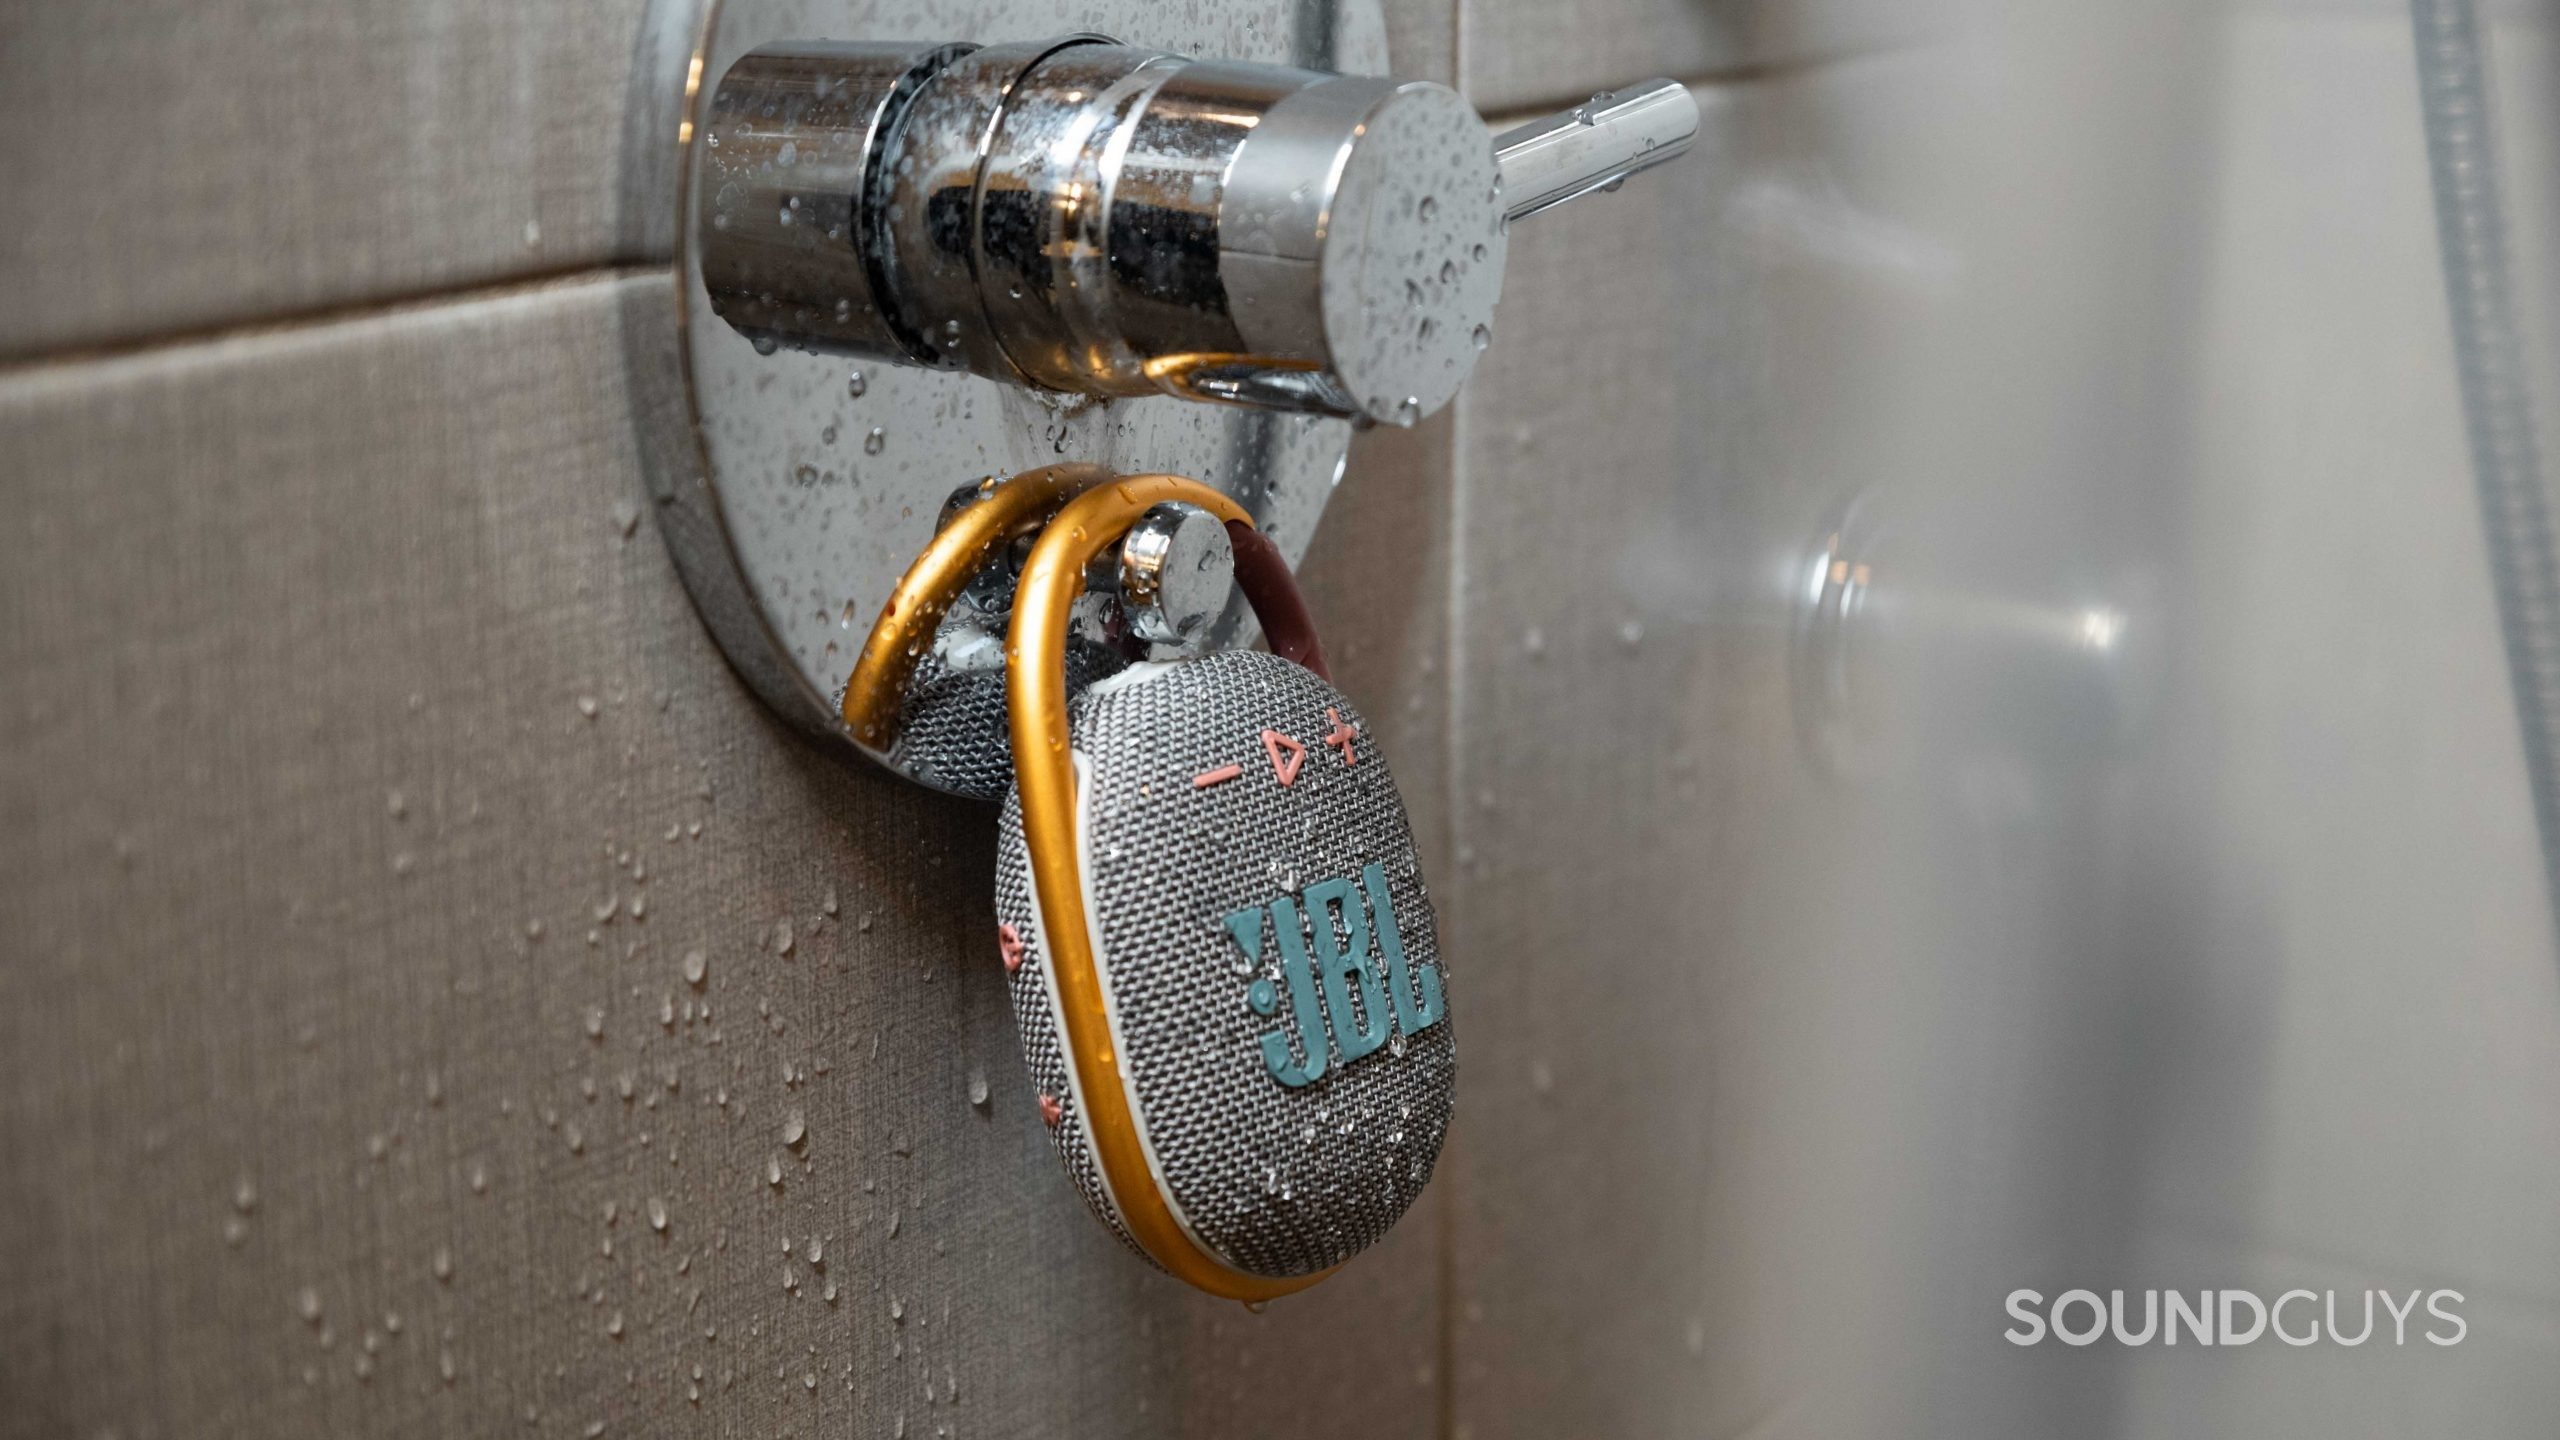 The JBL Clip 4 Bluetooth speaker hands from a shower as it's sprinkled by water.